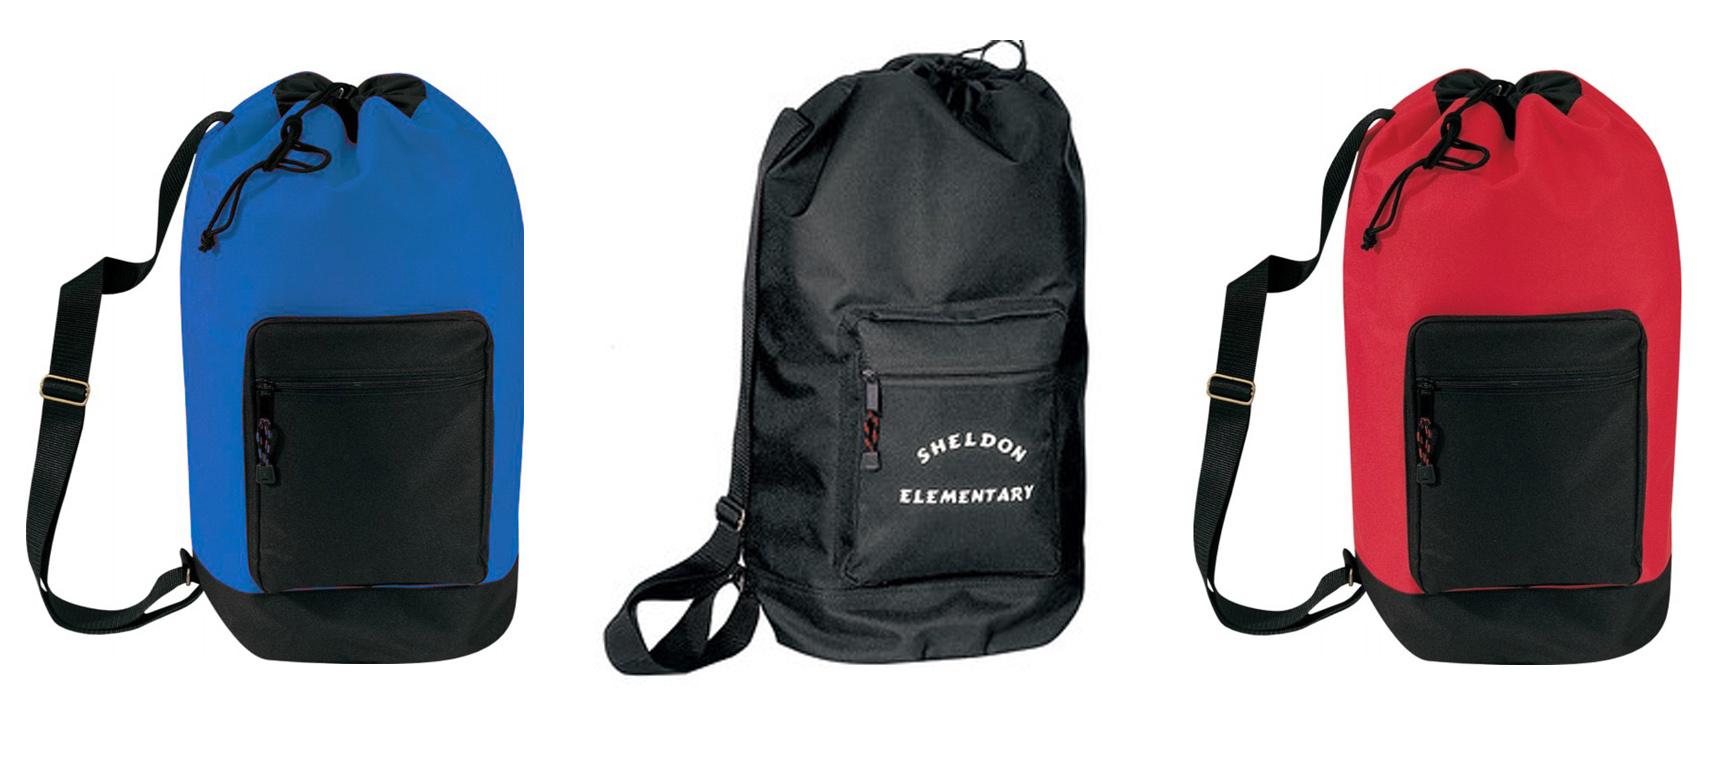 Drawstring Carry-On BACKPACKs w/ Cargo Zippered Pockets & Adjustable Strap - Choose Your Color(s)